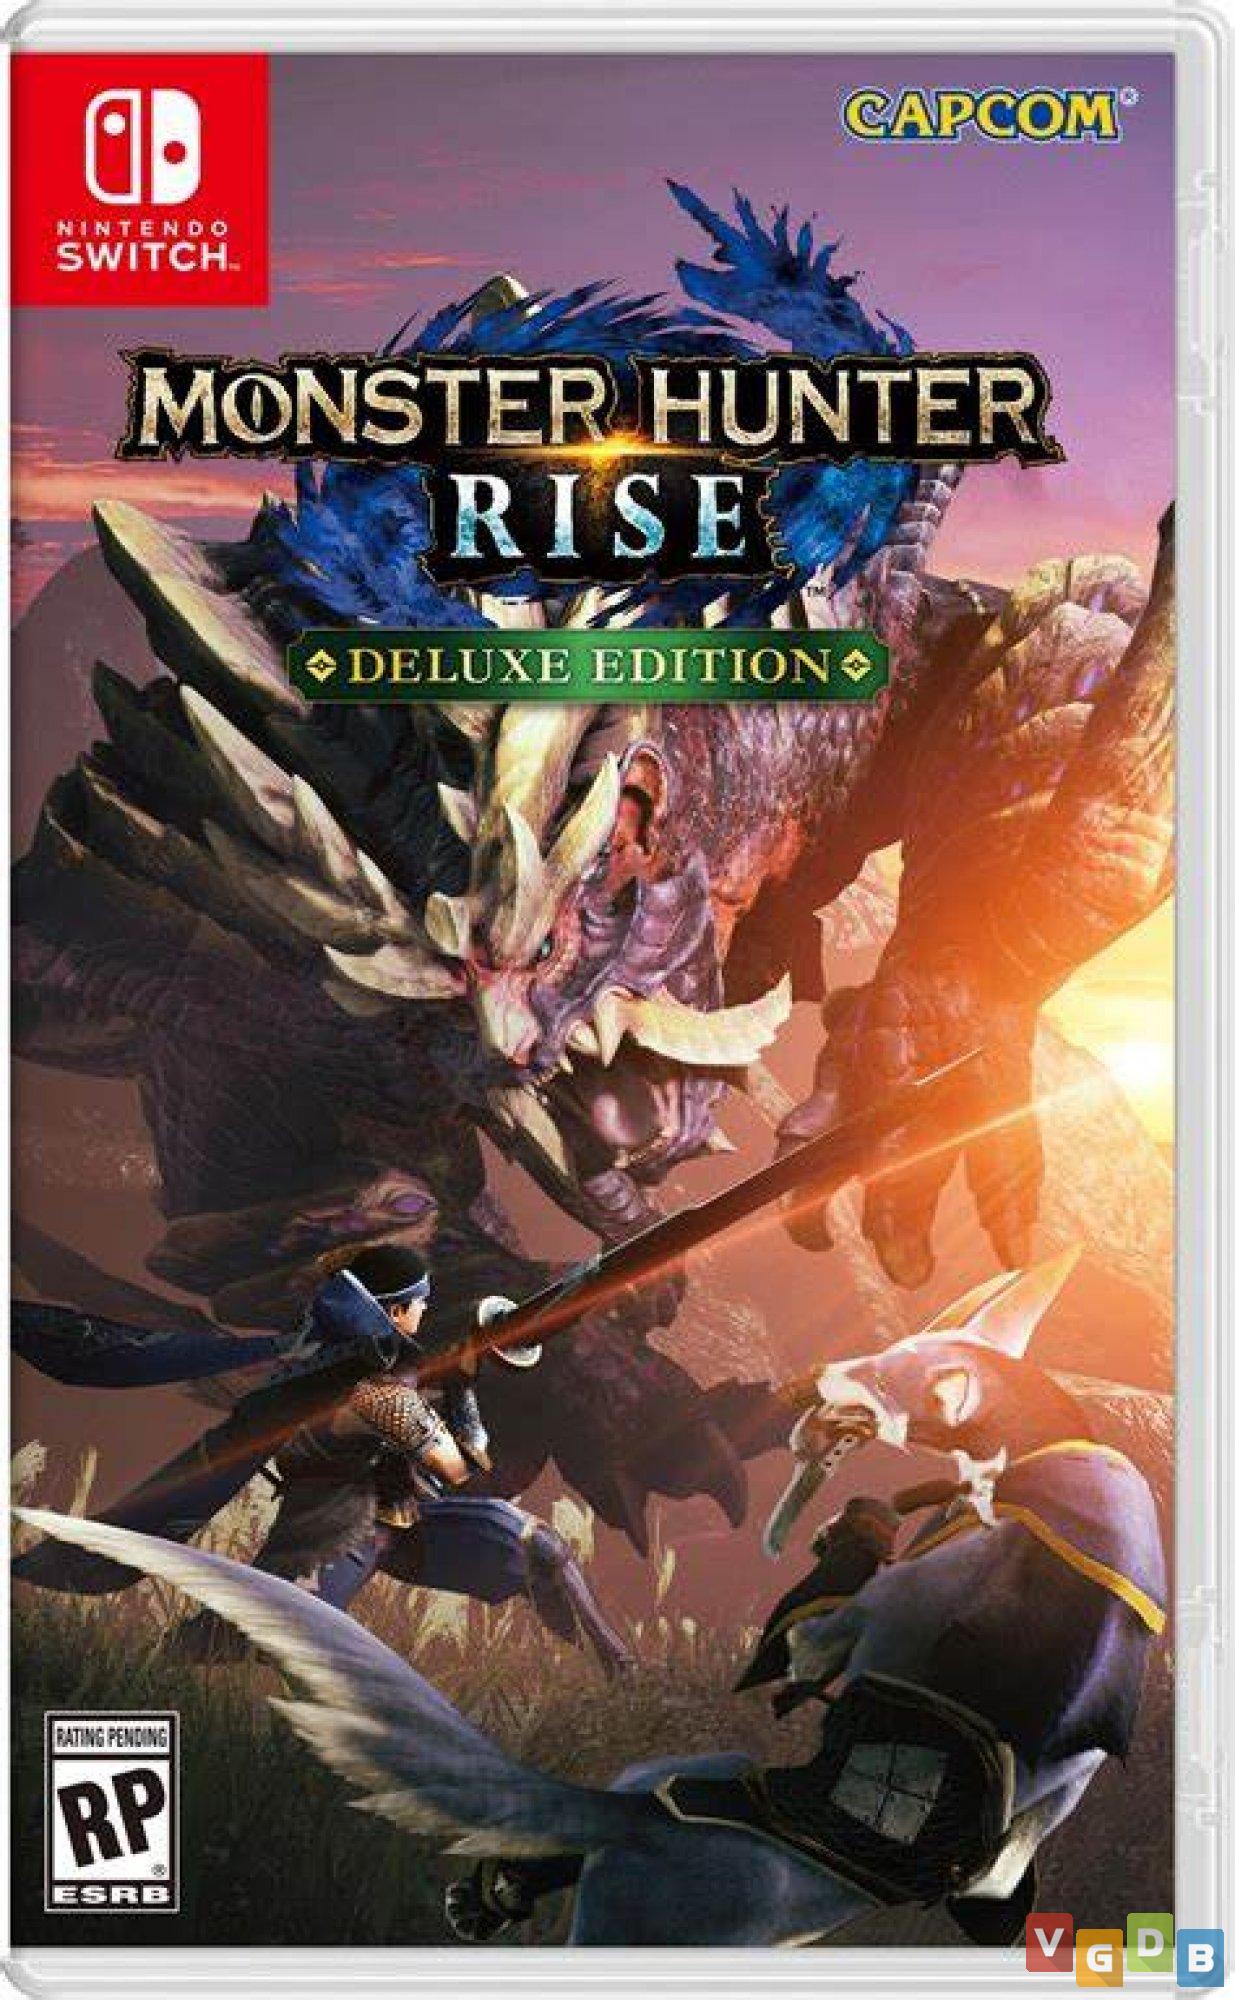 Monster Hunter Rise Deluxe Edition VGDB Vídeo Game Data Base